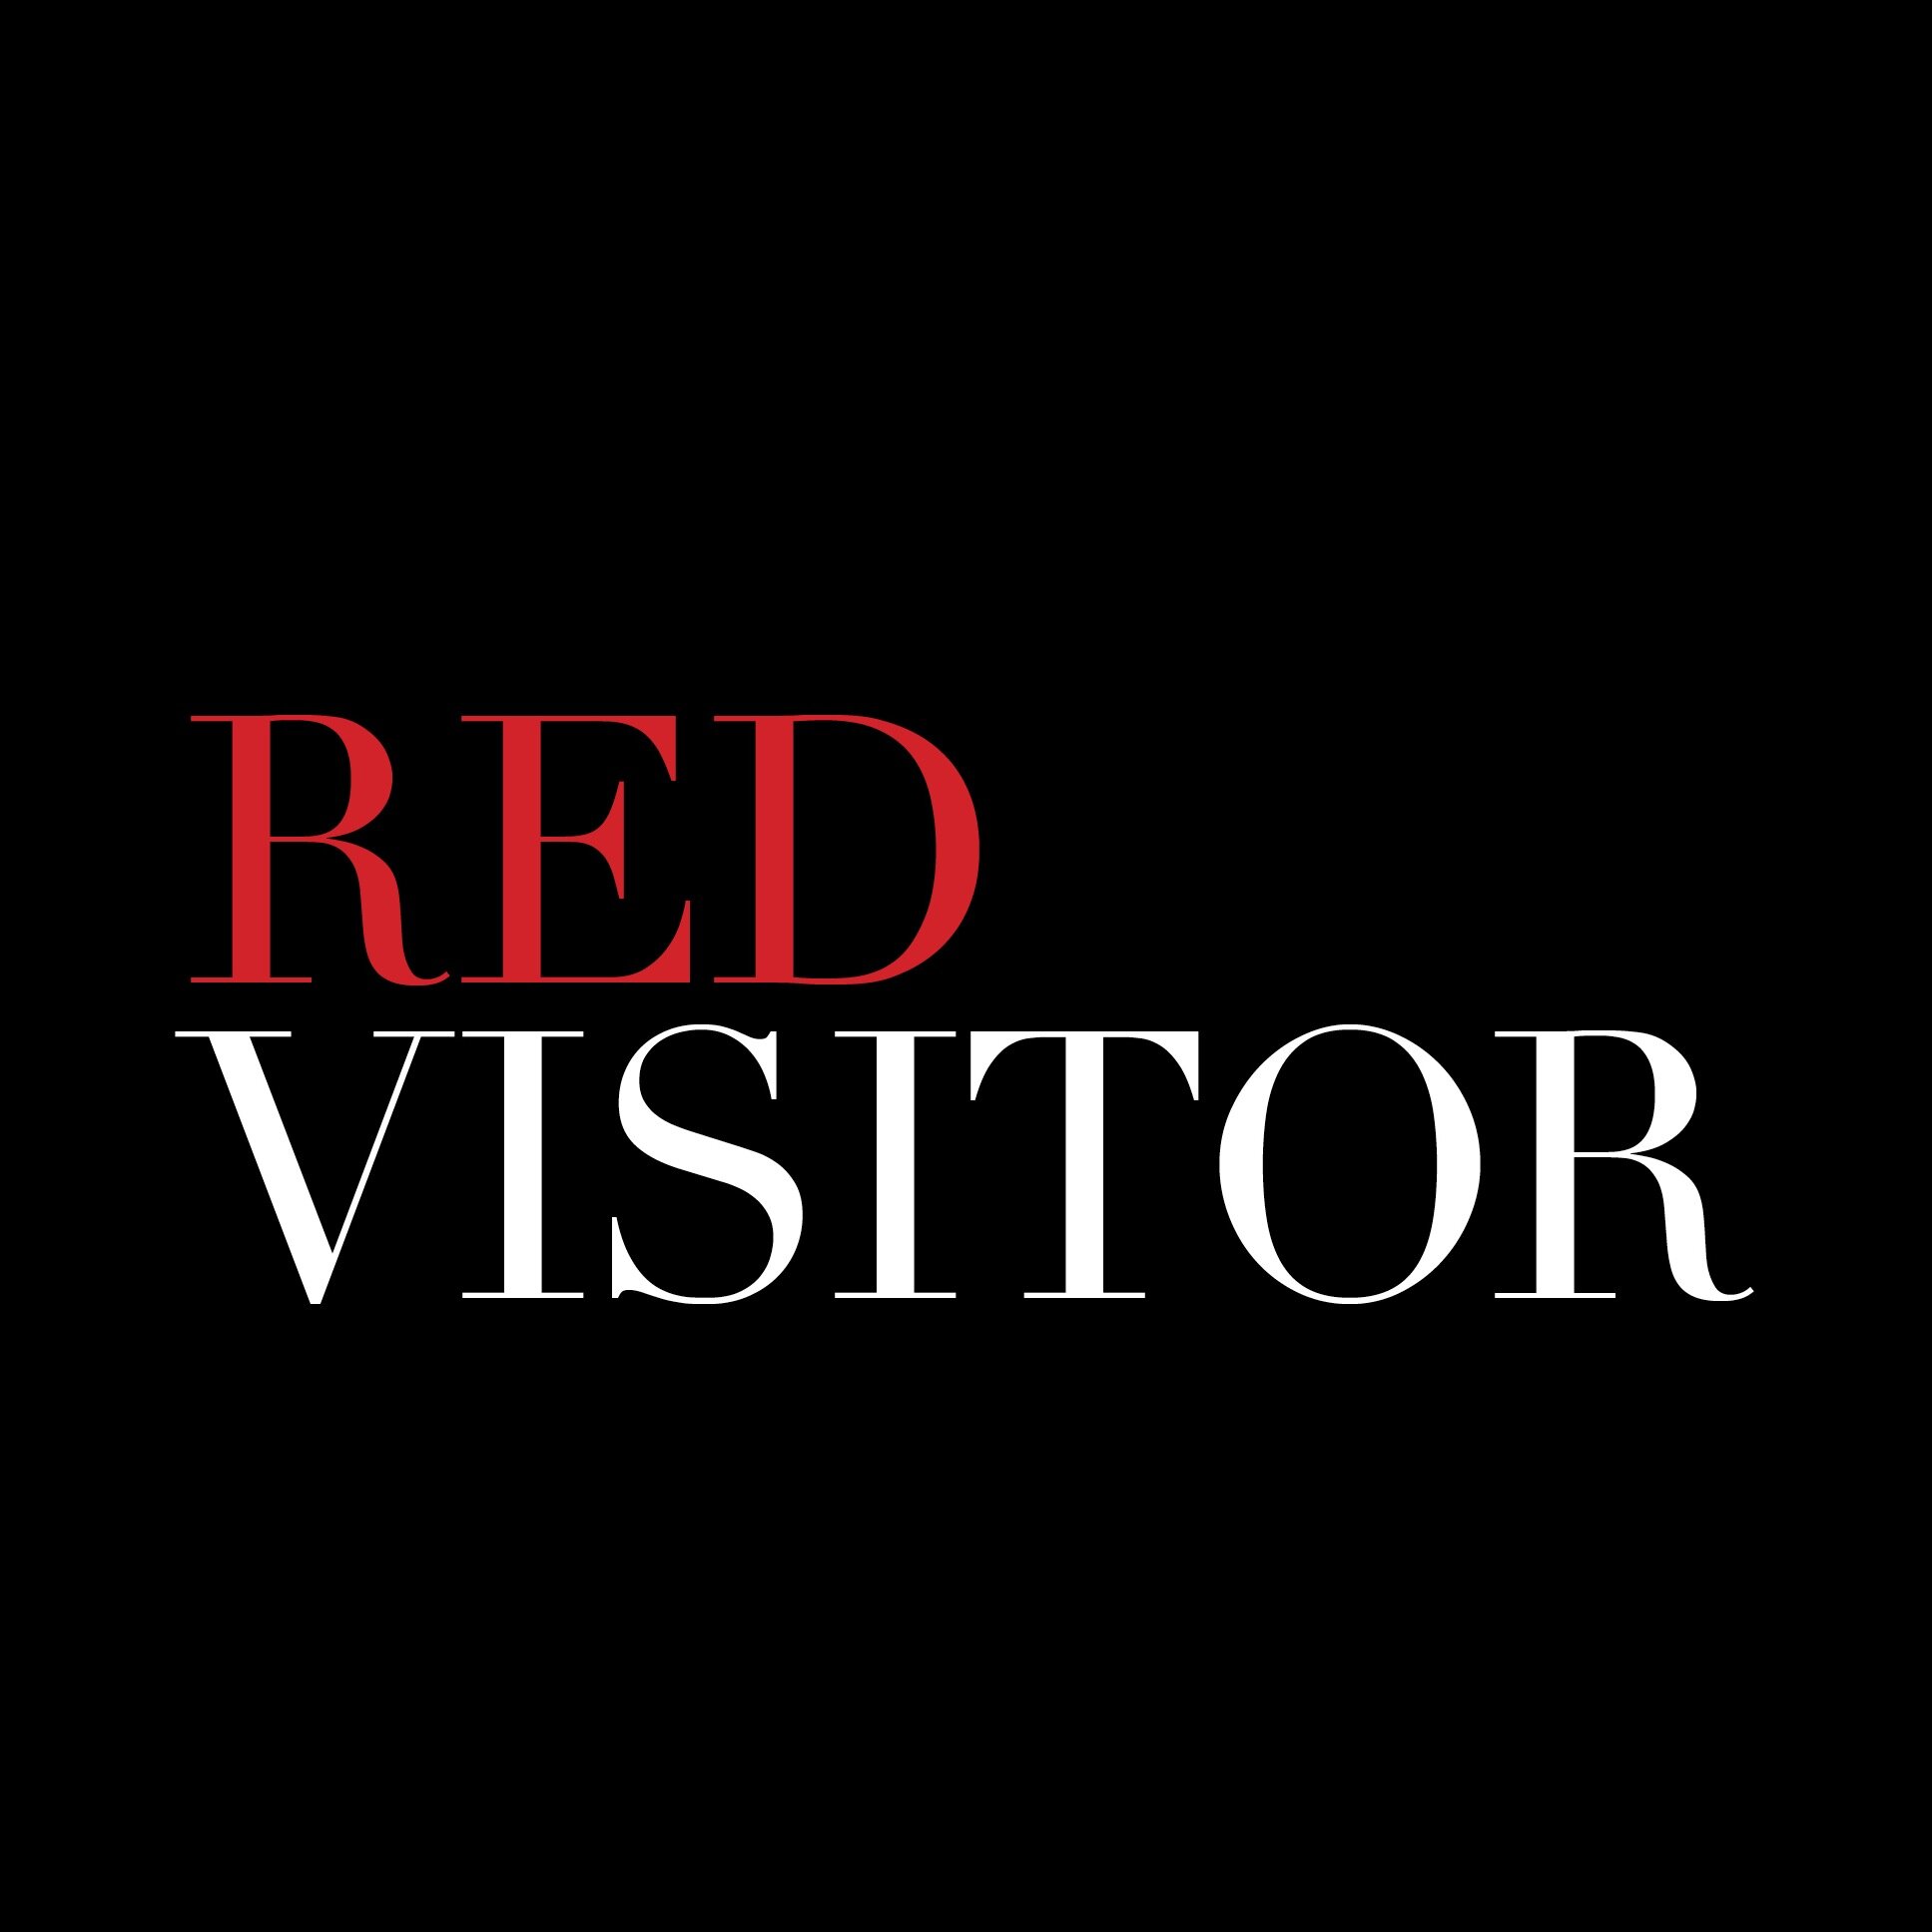 RedVisitor is a Travel & Lifestyle magazine for discerning, style-conscious people.
Buy a copy of the magazine http://t.co/qGdXE2xzDj